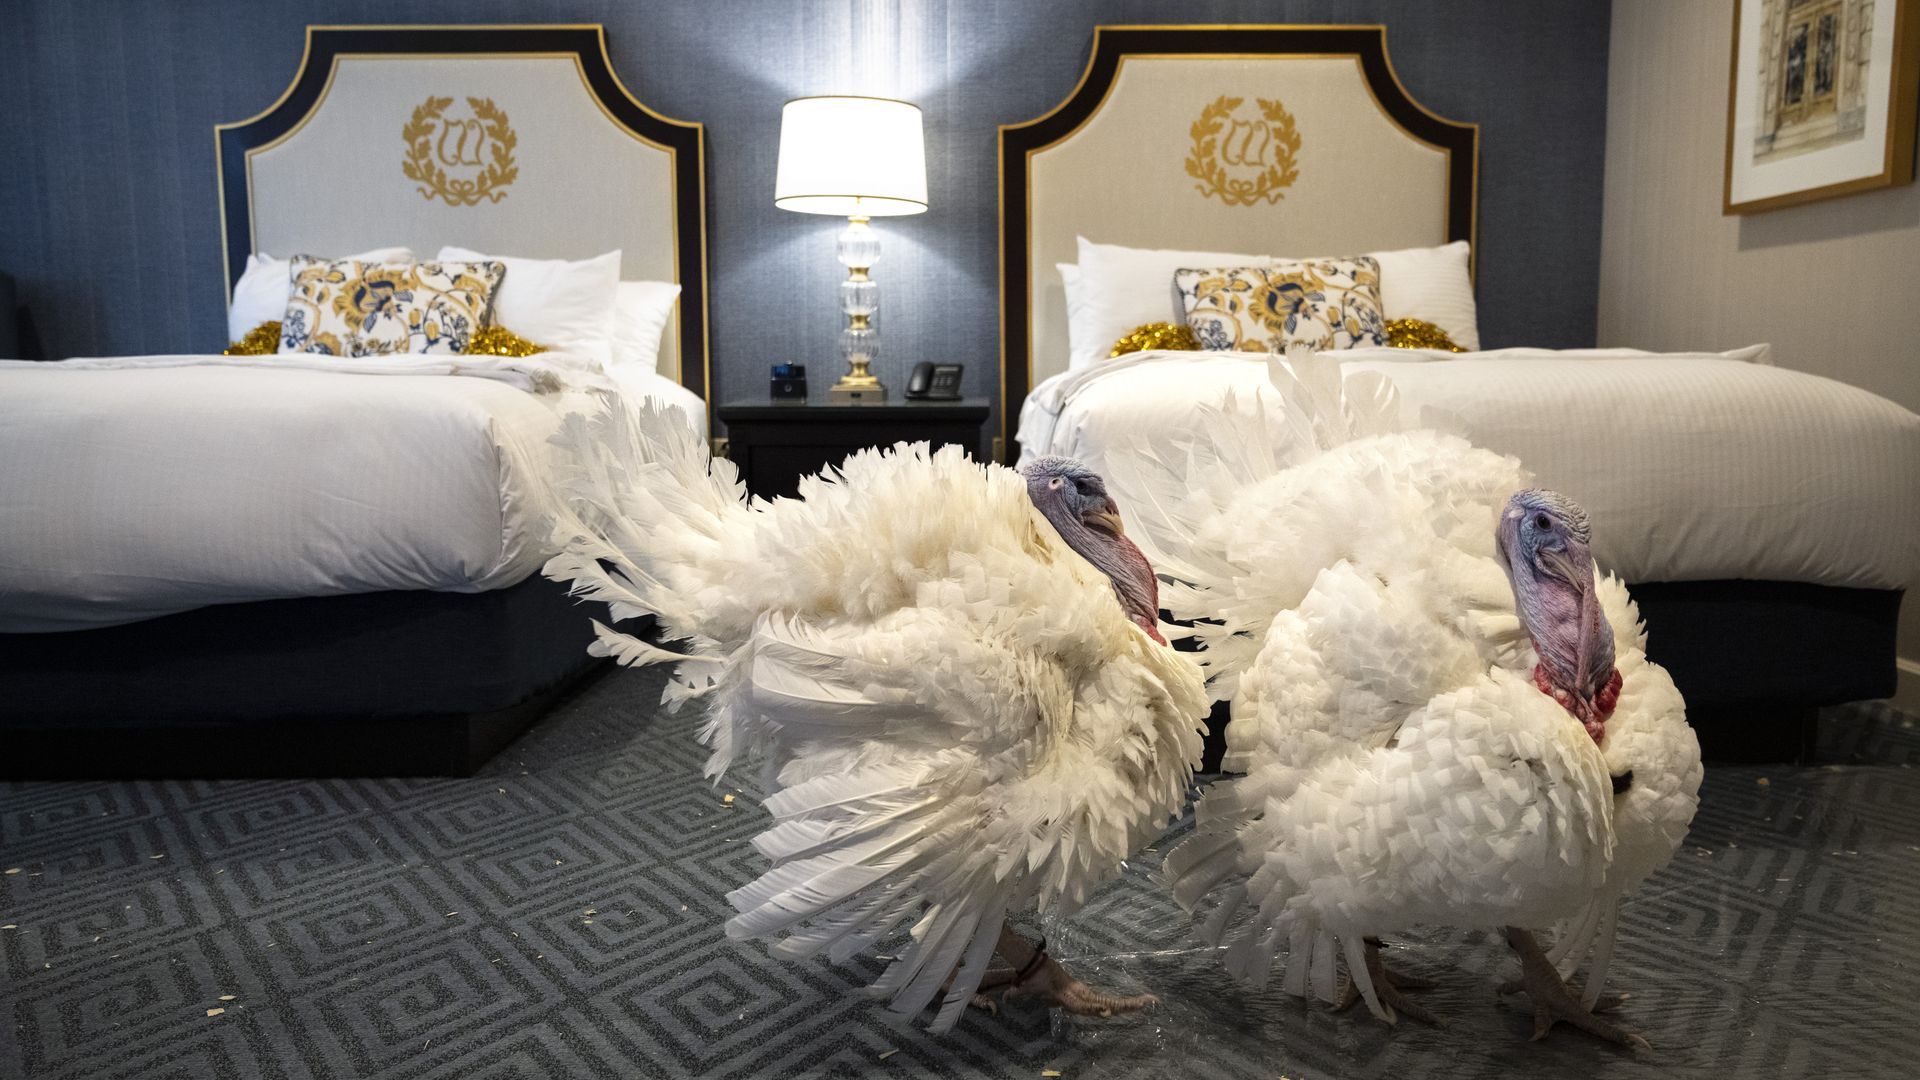 Two turkeys are seen in the Willard Hotel ahead of their traditional pre-Thanksgiving pardoning by the president.